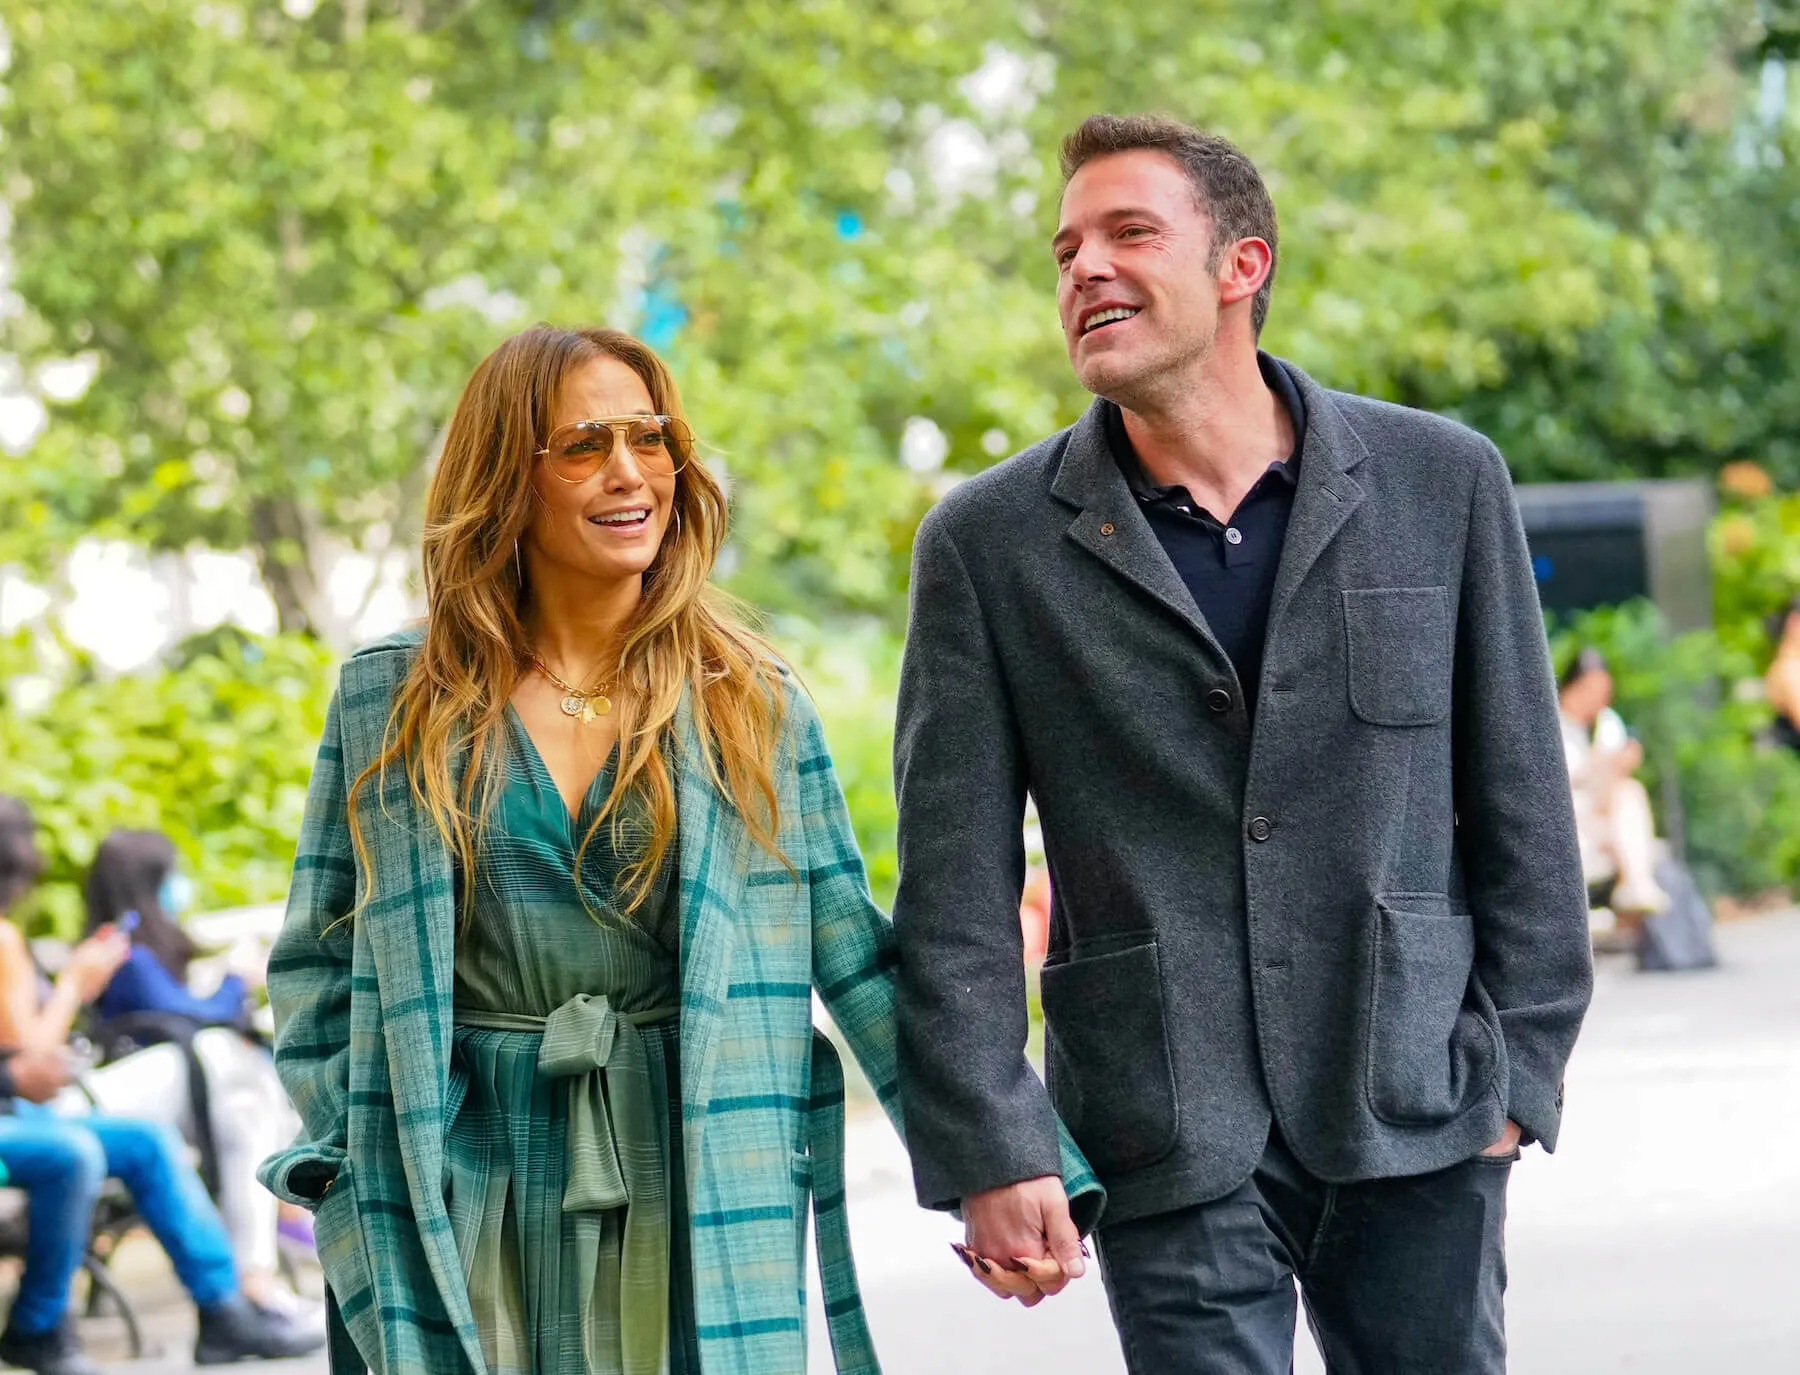 Jennifer Lopez and Ben Affleck holding hands and walking outside in New York City while talking in September 2021